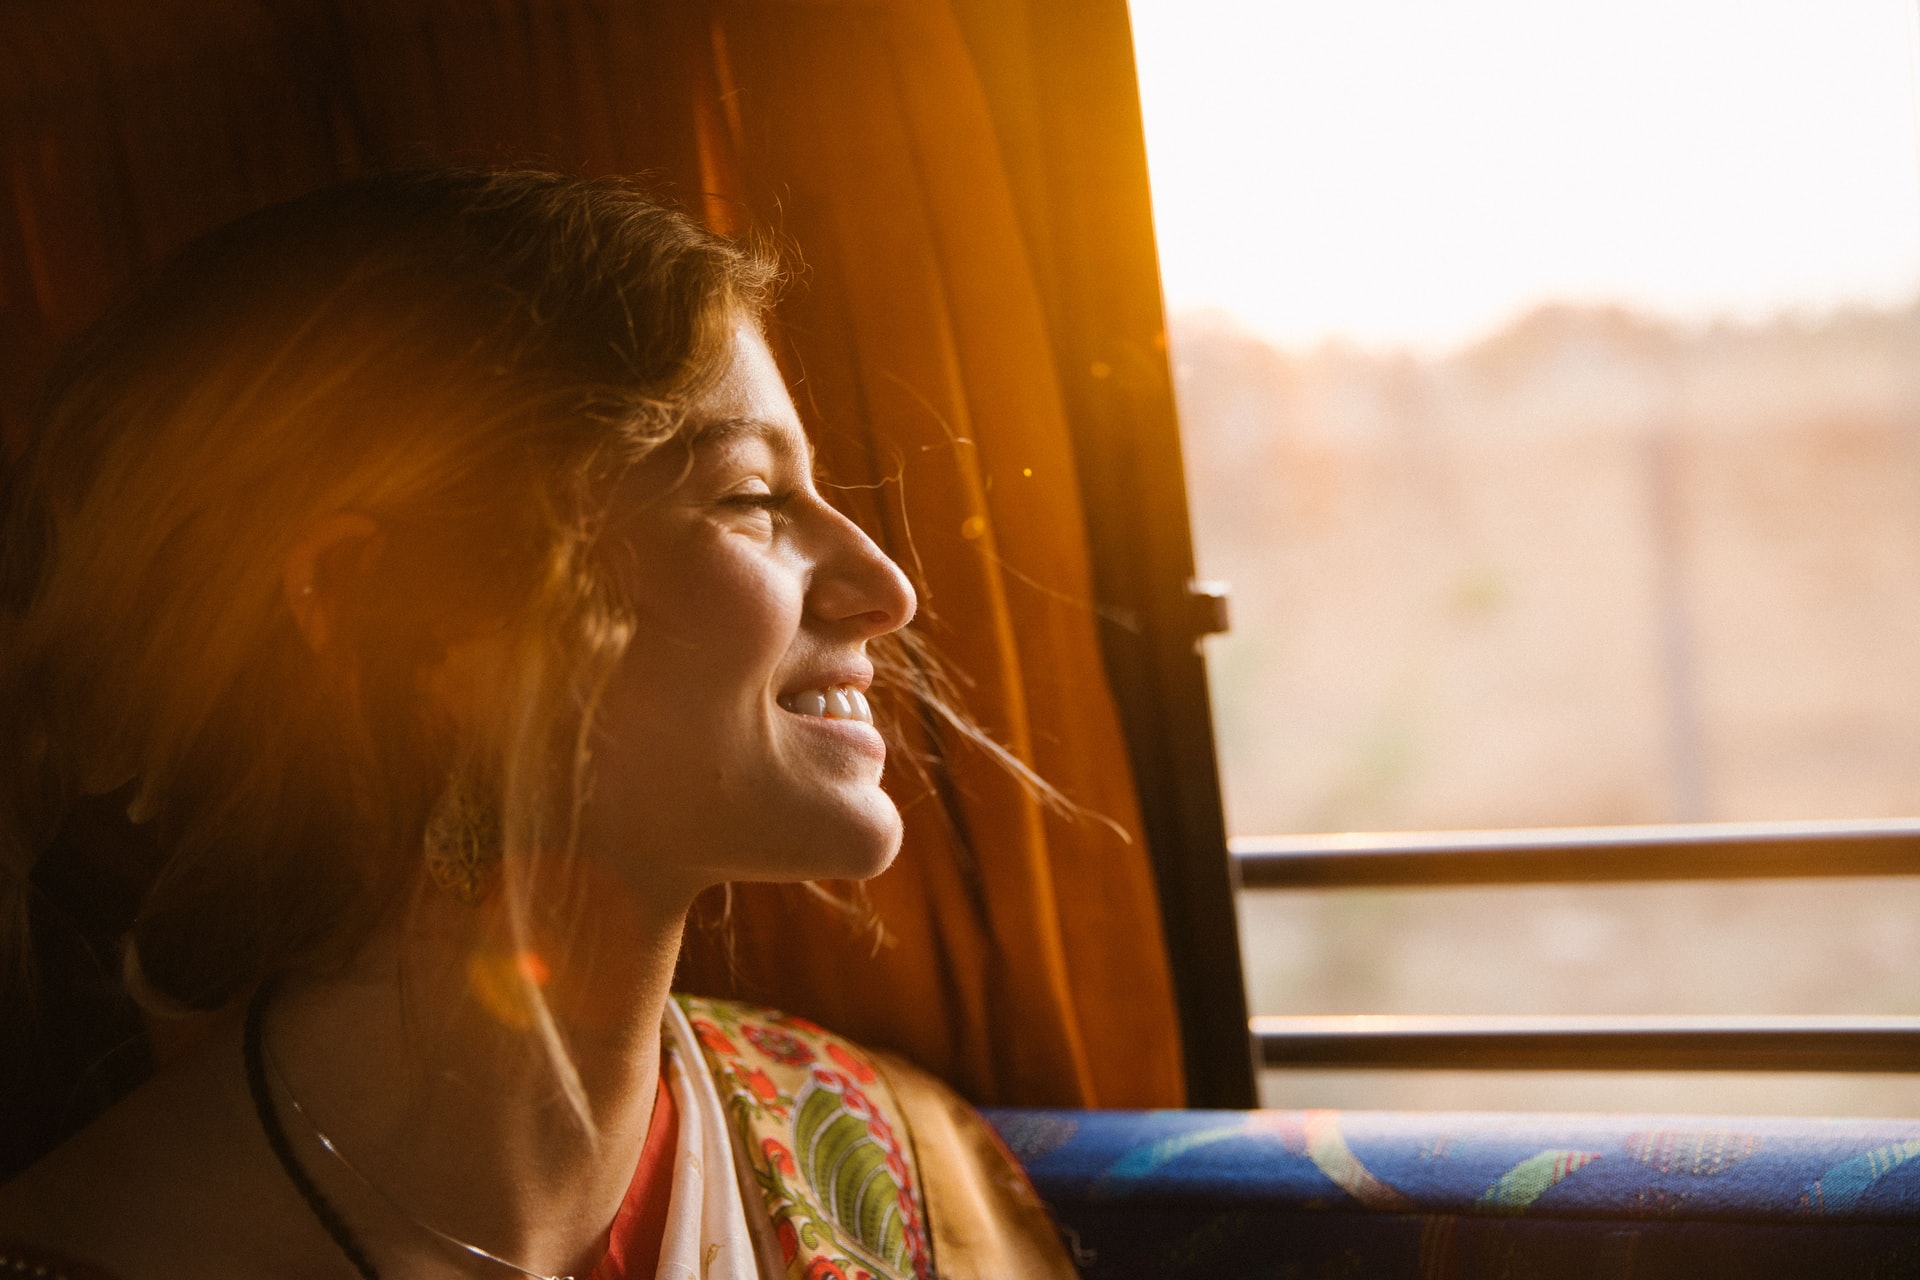 A woman smiling and looking out the window of a shuttle bus.